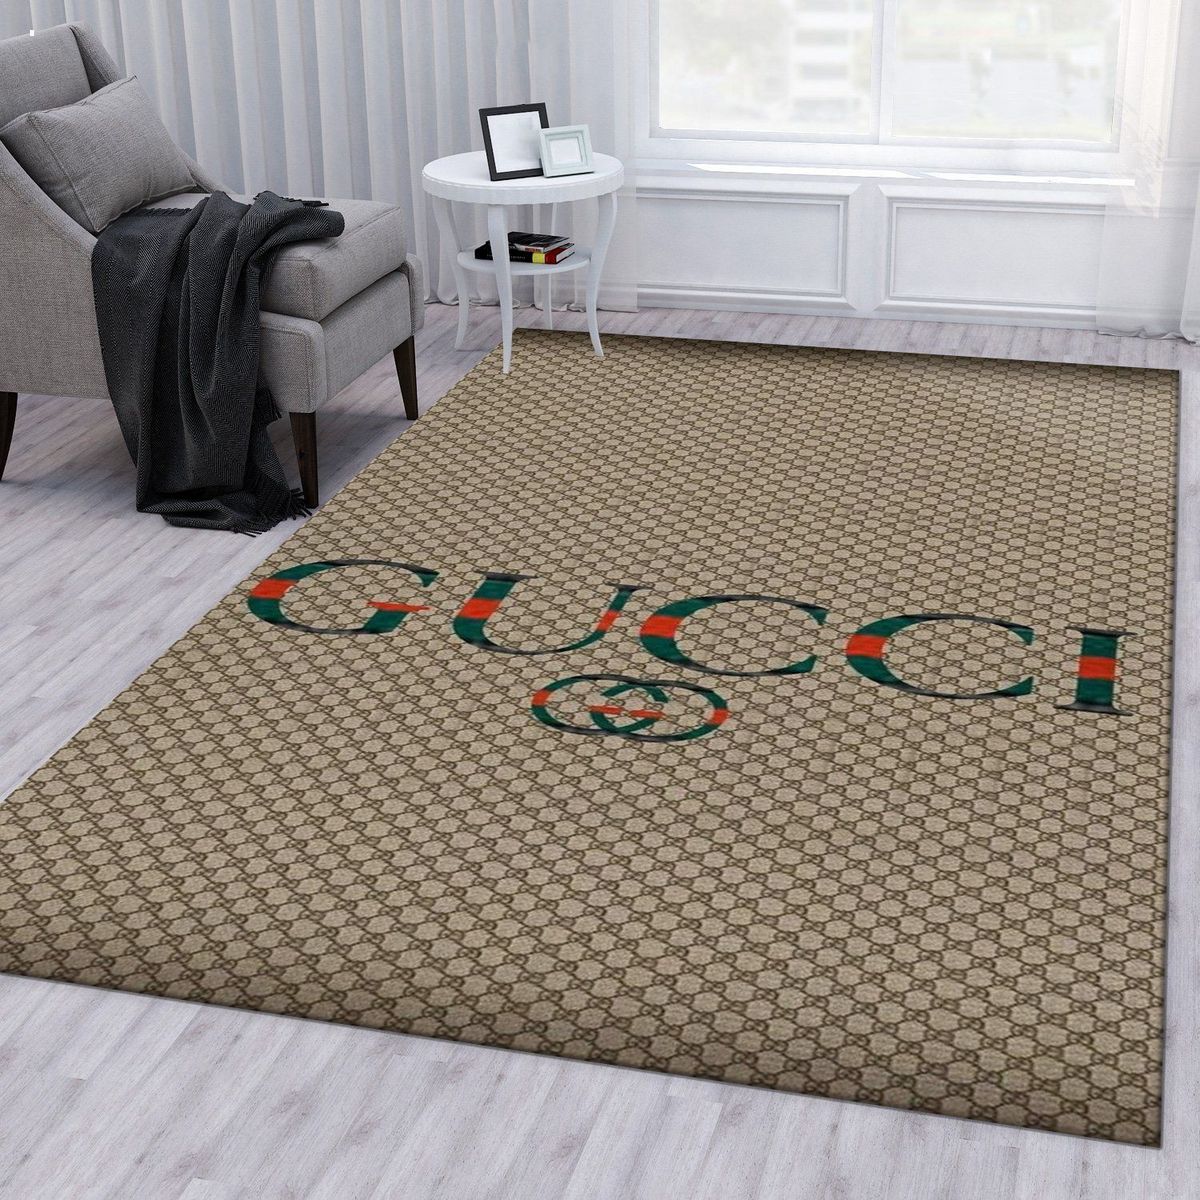 NEW Gucci Full Printing Pattern Luxury Brand Carpet Rug Limited